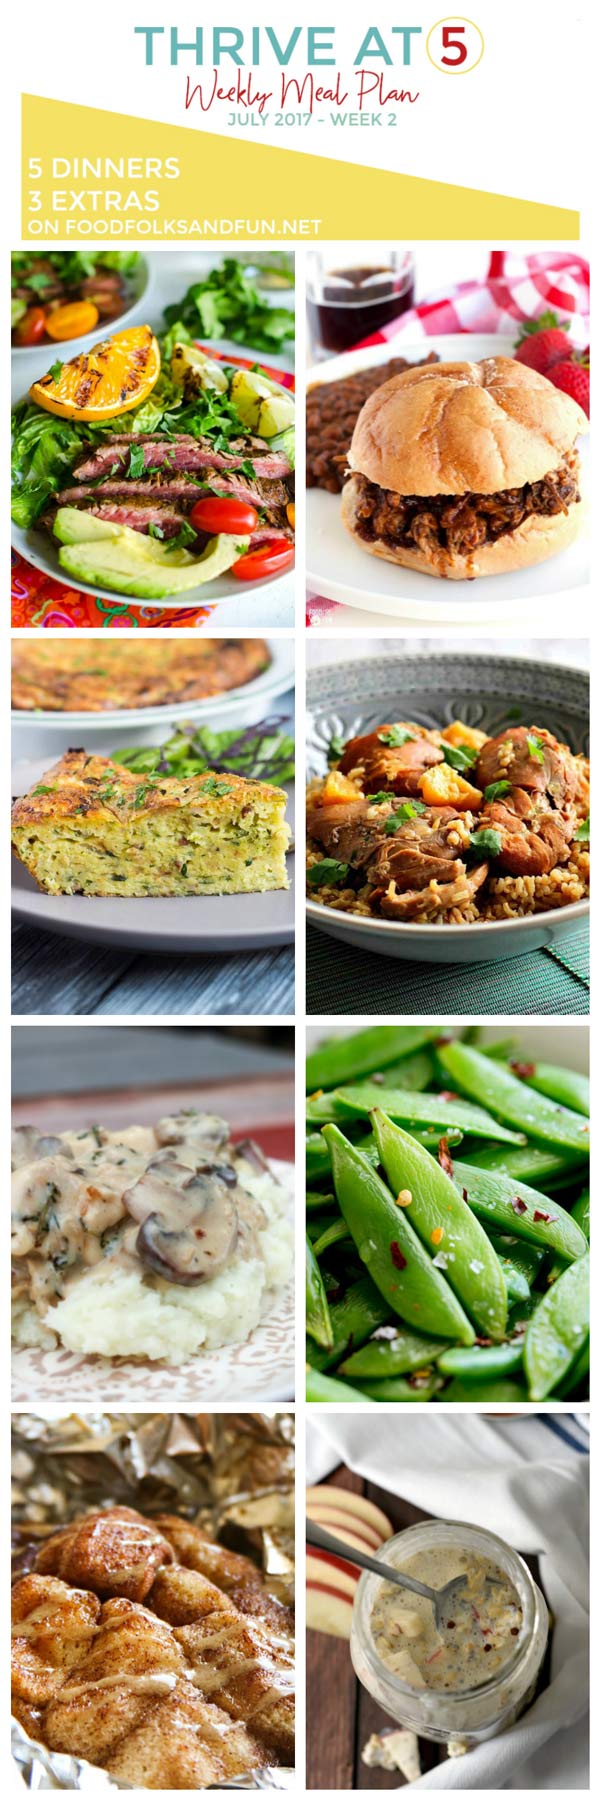 Various dinner options with text overlay for Pinterest